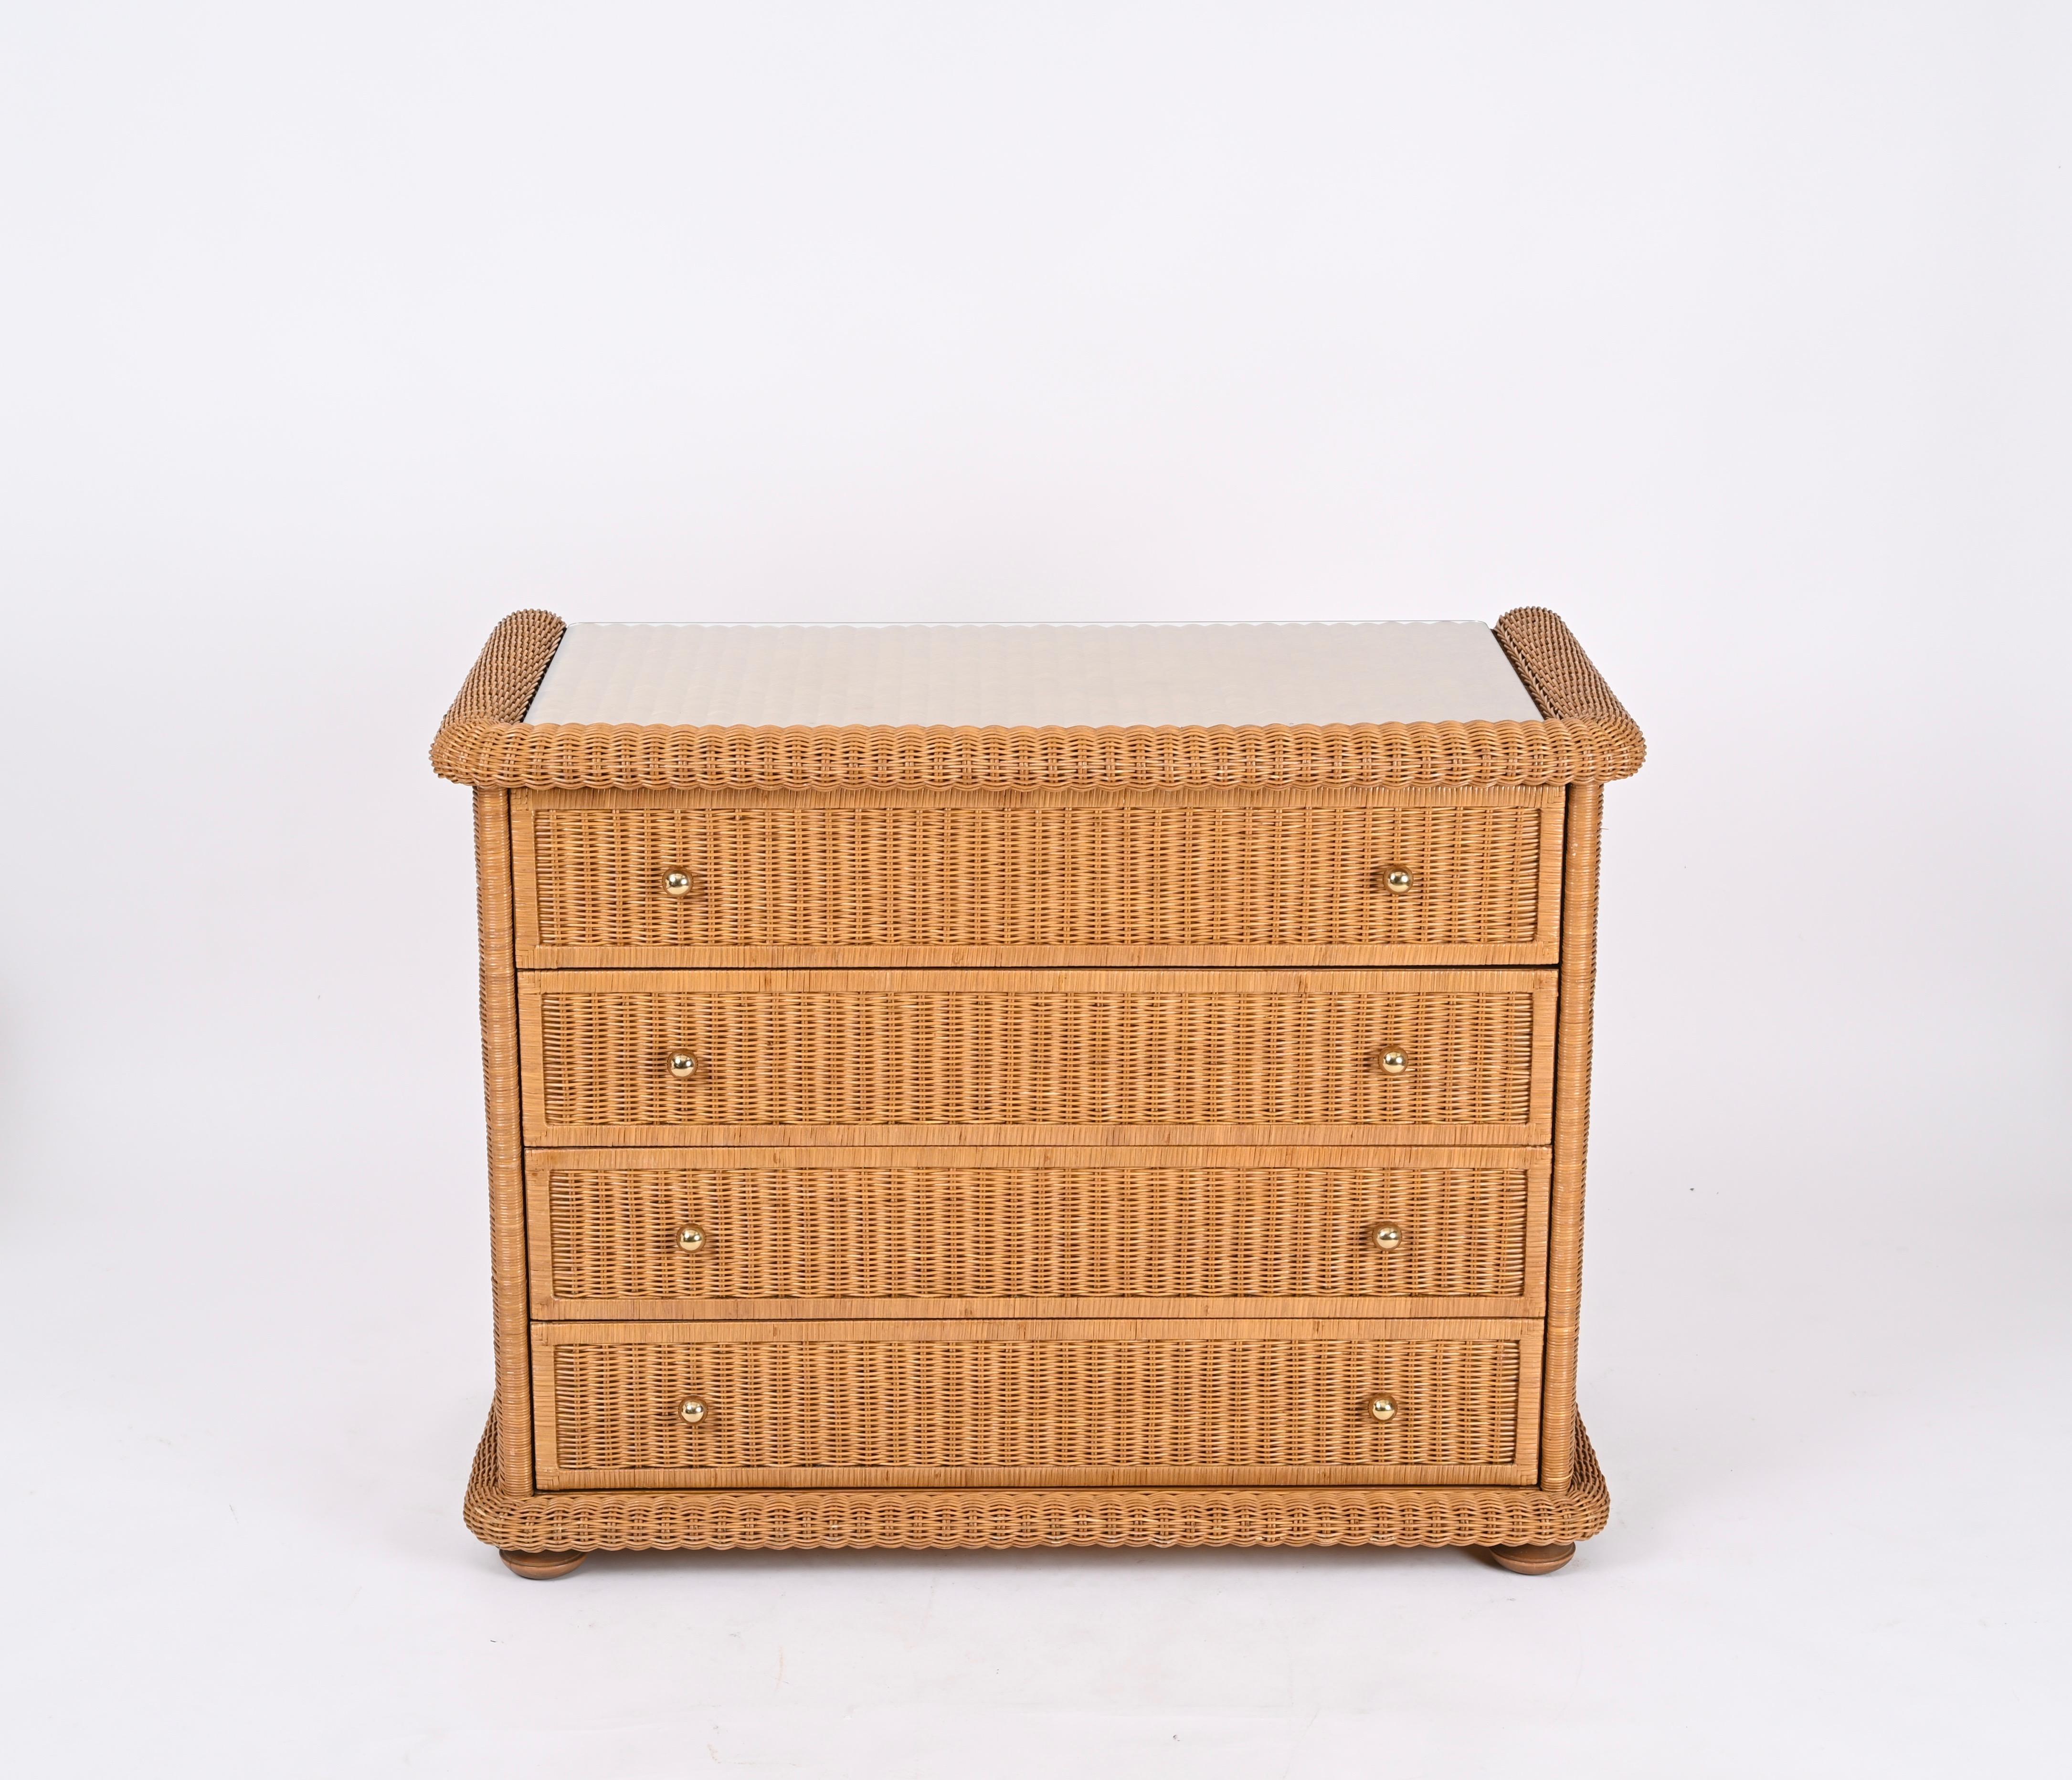 Italian French Riviera Chest of Drawers in Woven Rattan by Vivai del Sud, Italy, 1970s For Sale